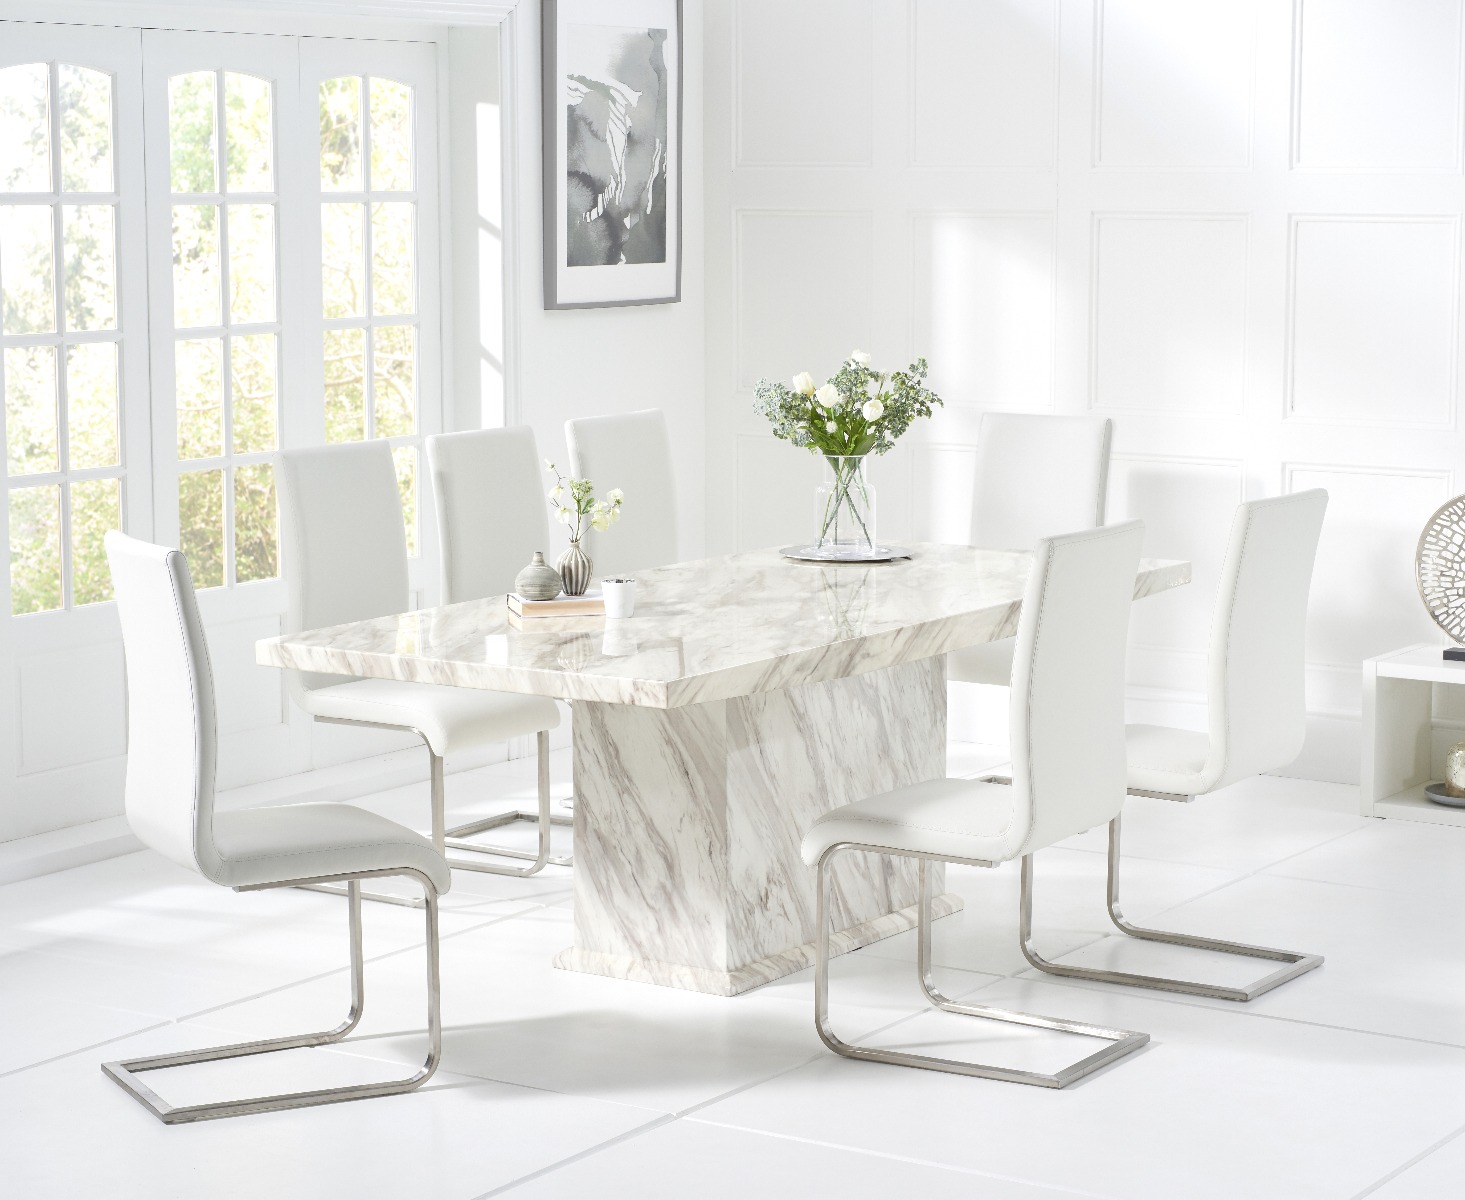 Calacatta 220cm Marbleeffect Dining Table With 8 Grey Malaga Chairs